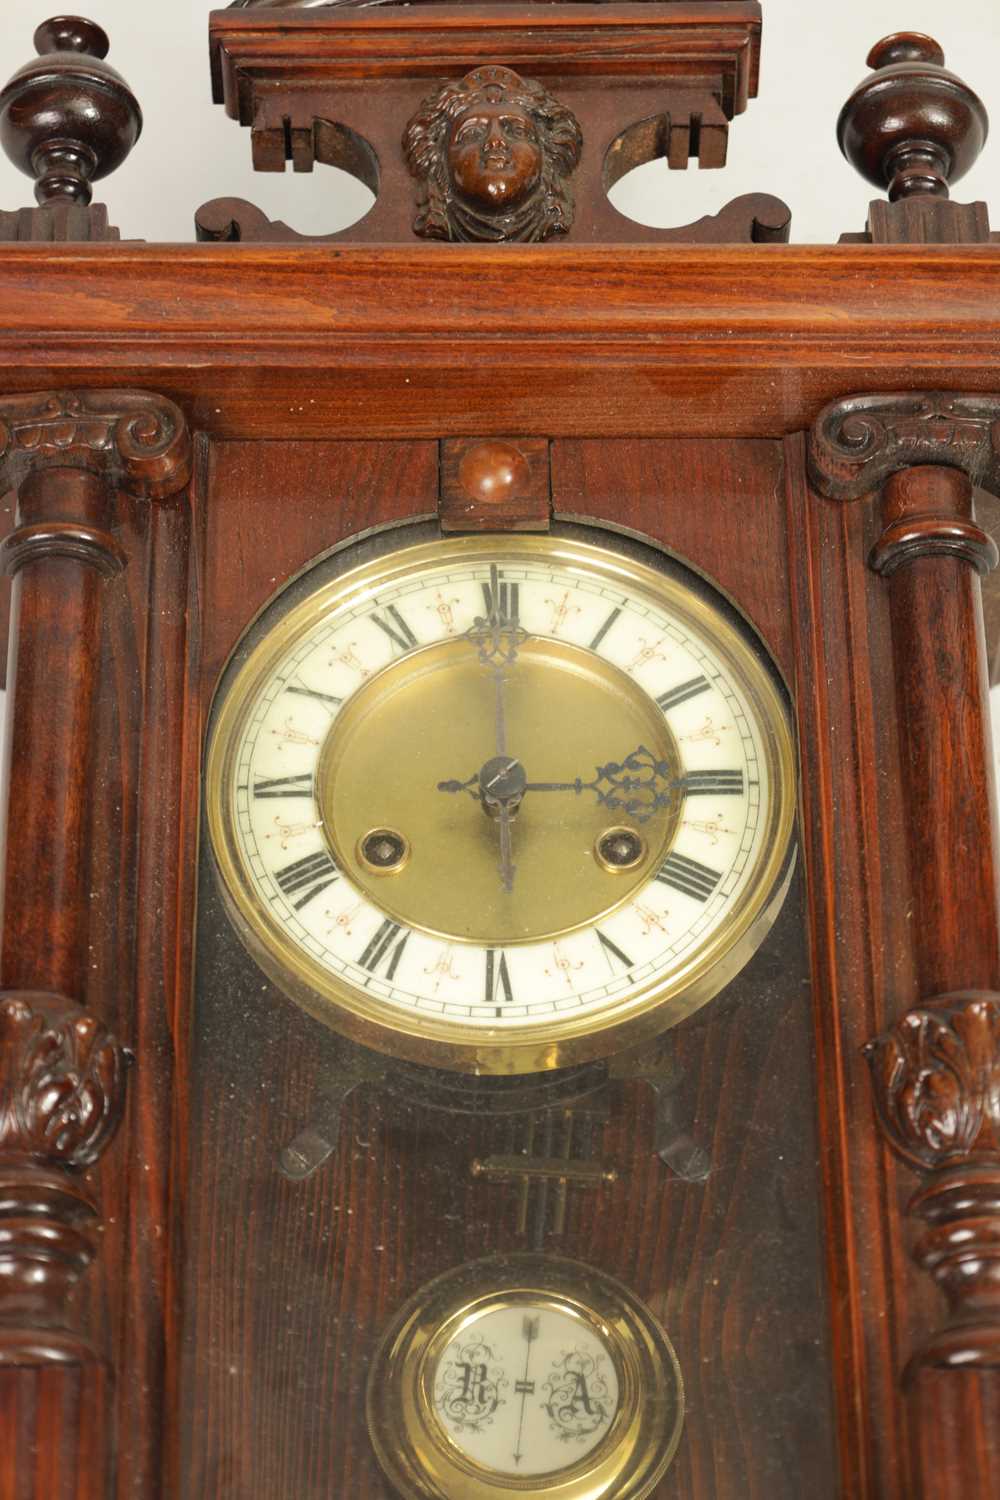 A SMALL 19TH CENTURY VIENNA STYLE WALL CLOCK - Image 3 of 11